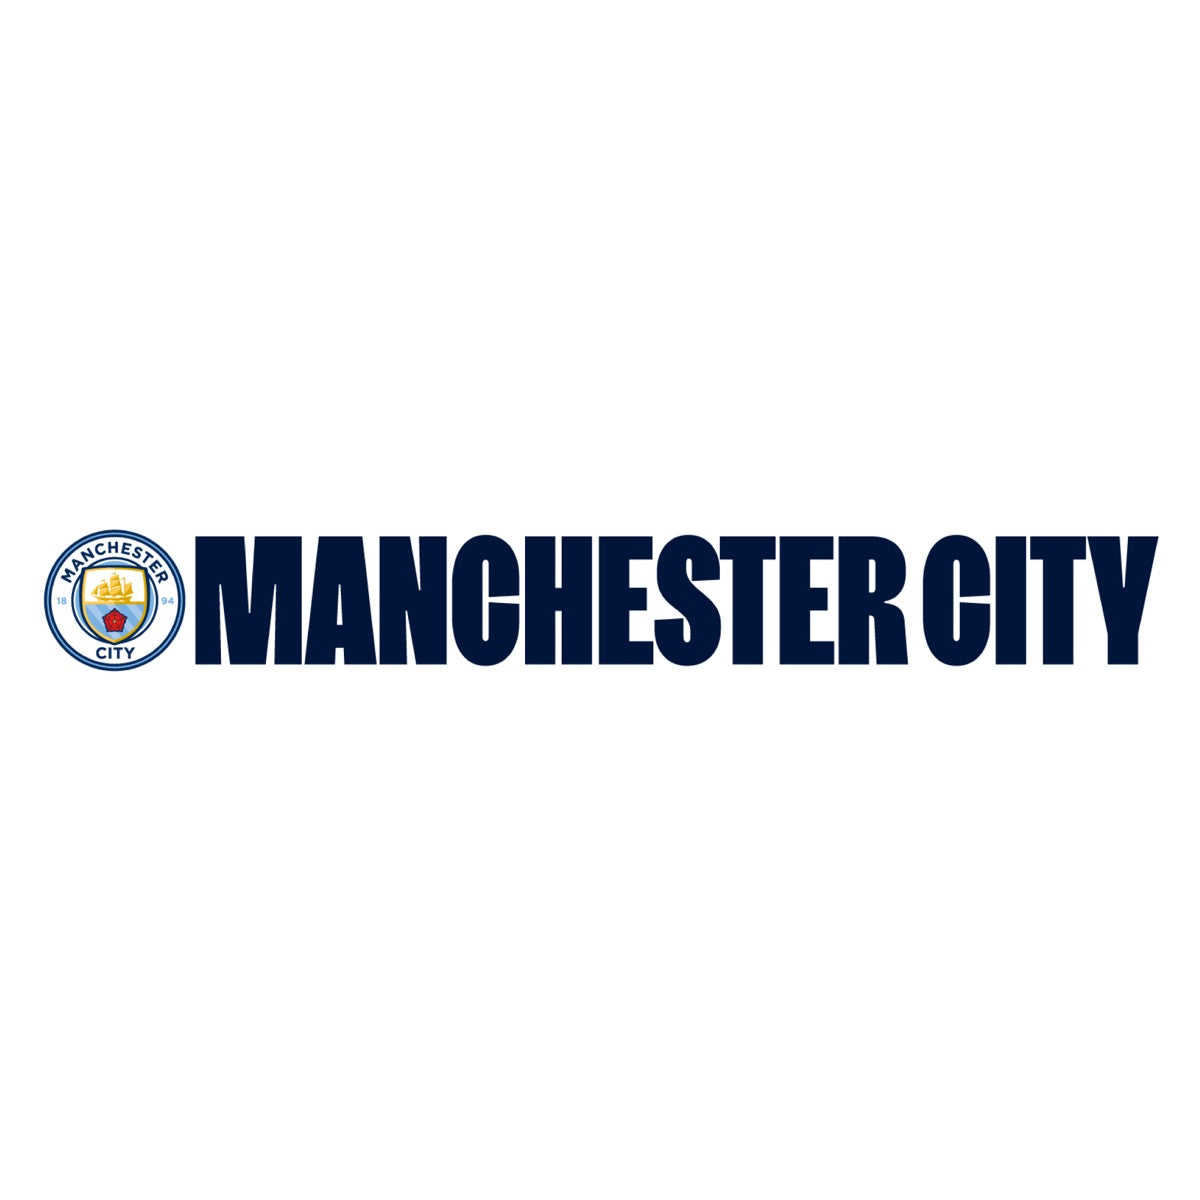 Manchester City Football Club - Crest & Club Name Wall Decal